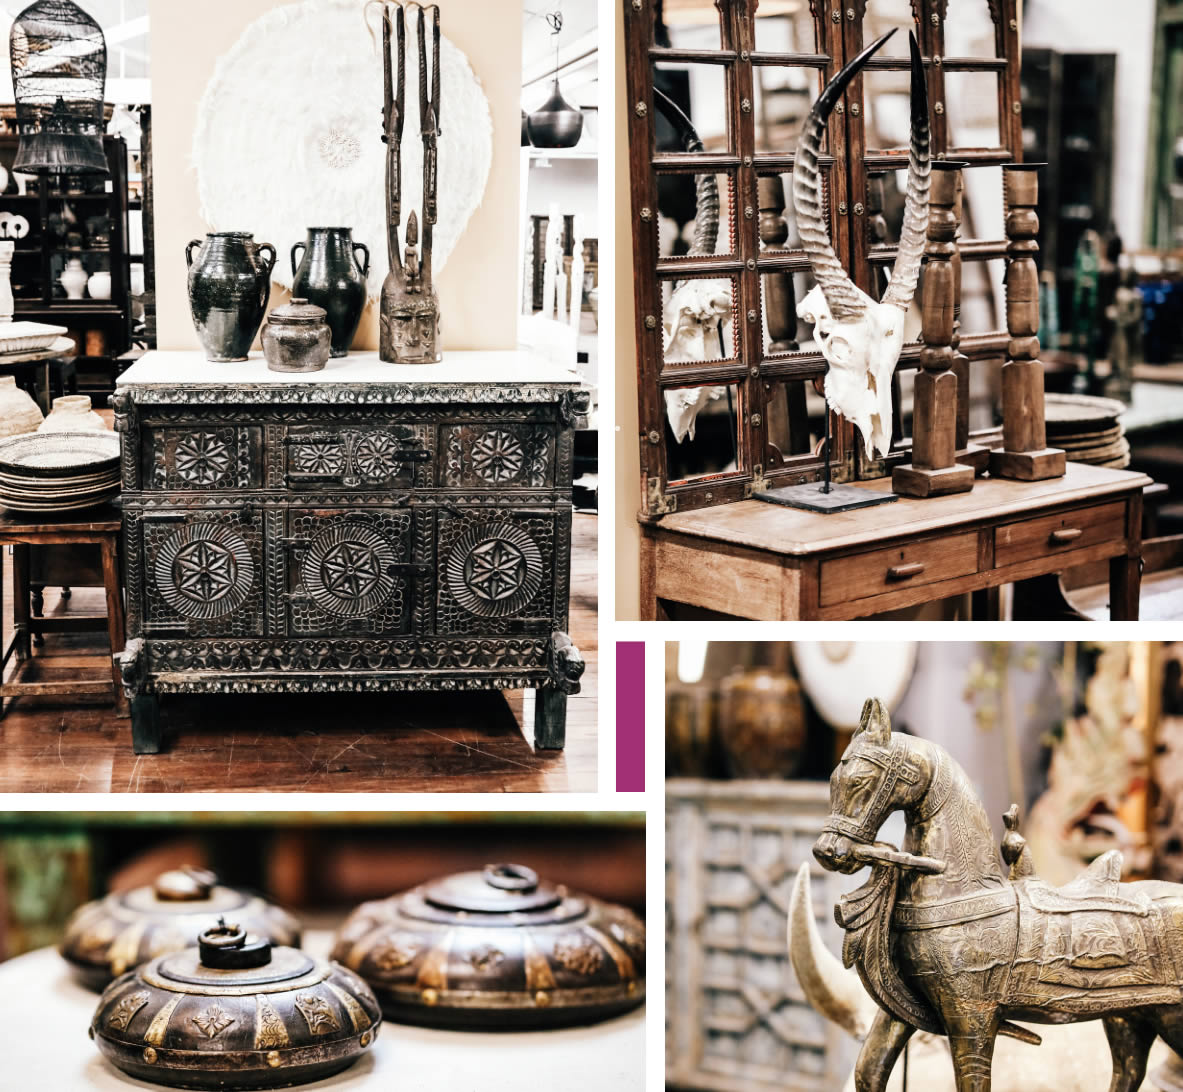 Indian antiques from Rajasthan